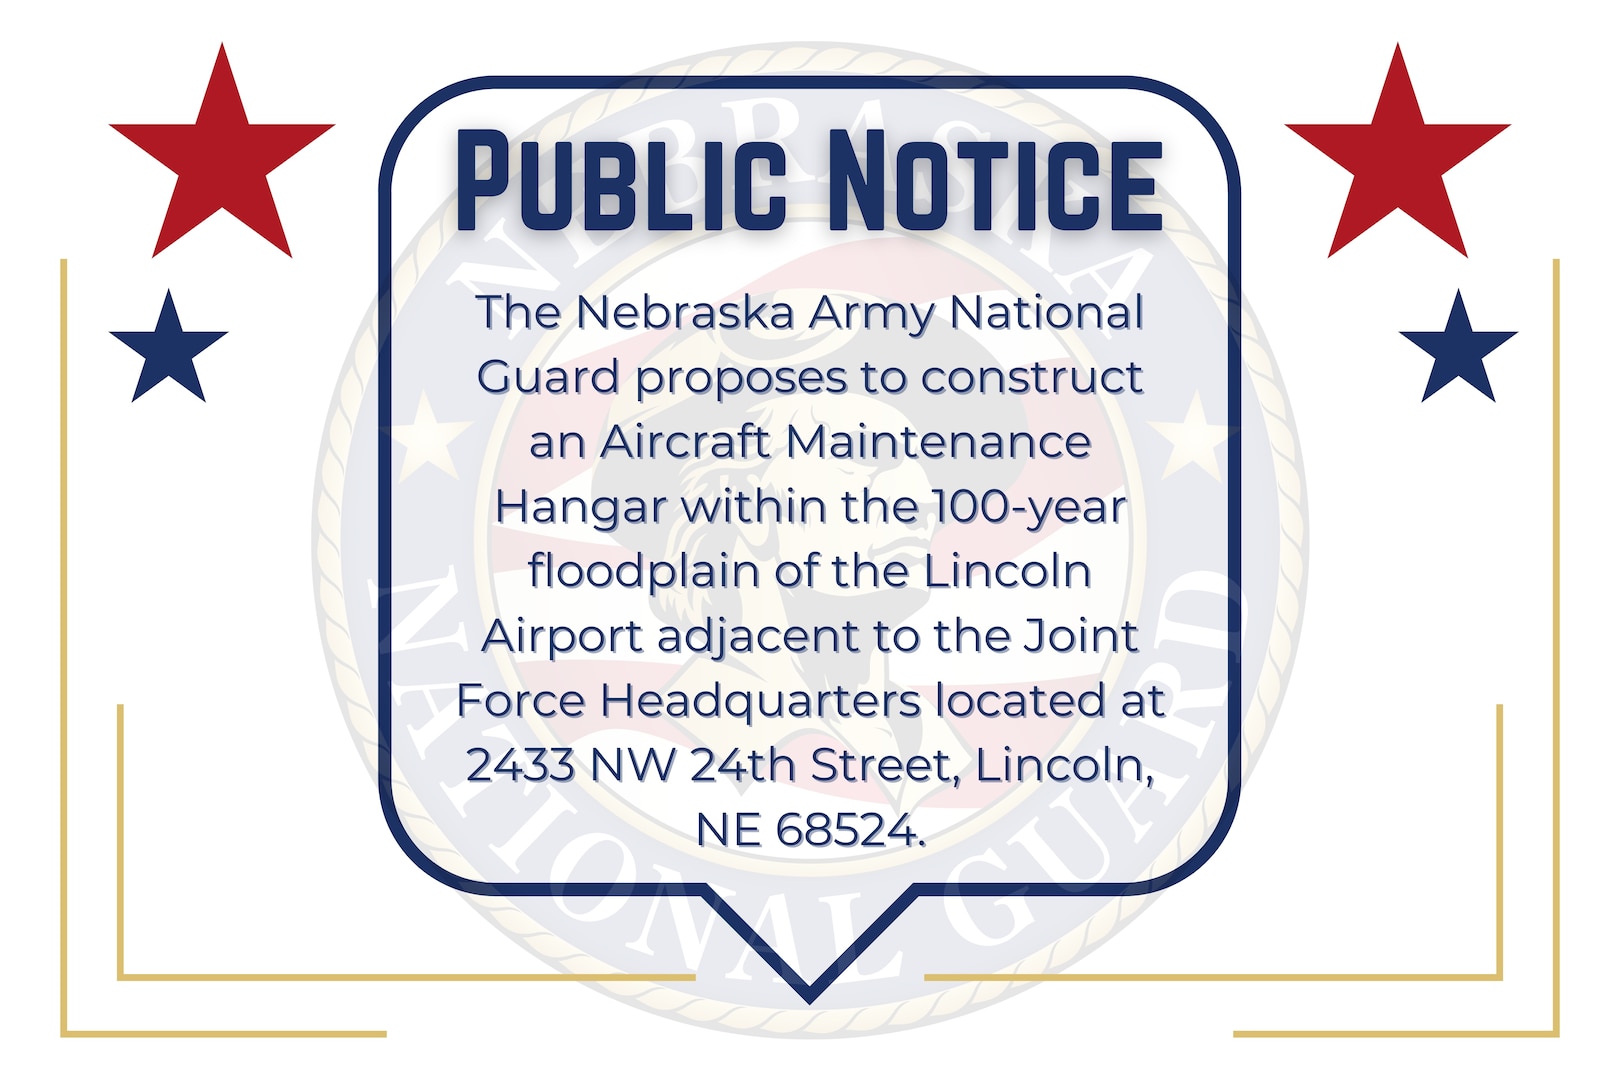 The Nebraska Army National Guard (NEARNG) proposes to construct an Aircraft Maintenance Hangar within the 100-year floodplain of the Lincoln Airport adjacent to the Joint Forces Headquarters located at 2433 NW 24th Street, Lincoln, NE 68524.